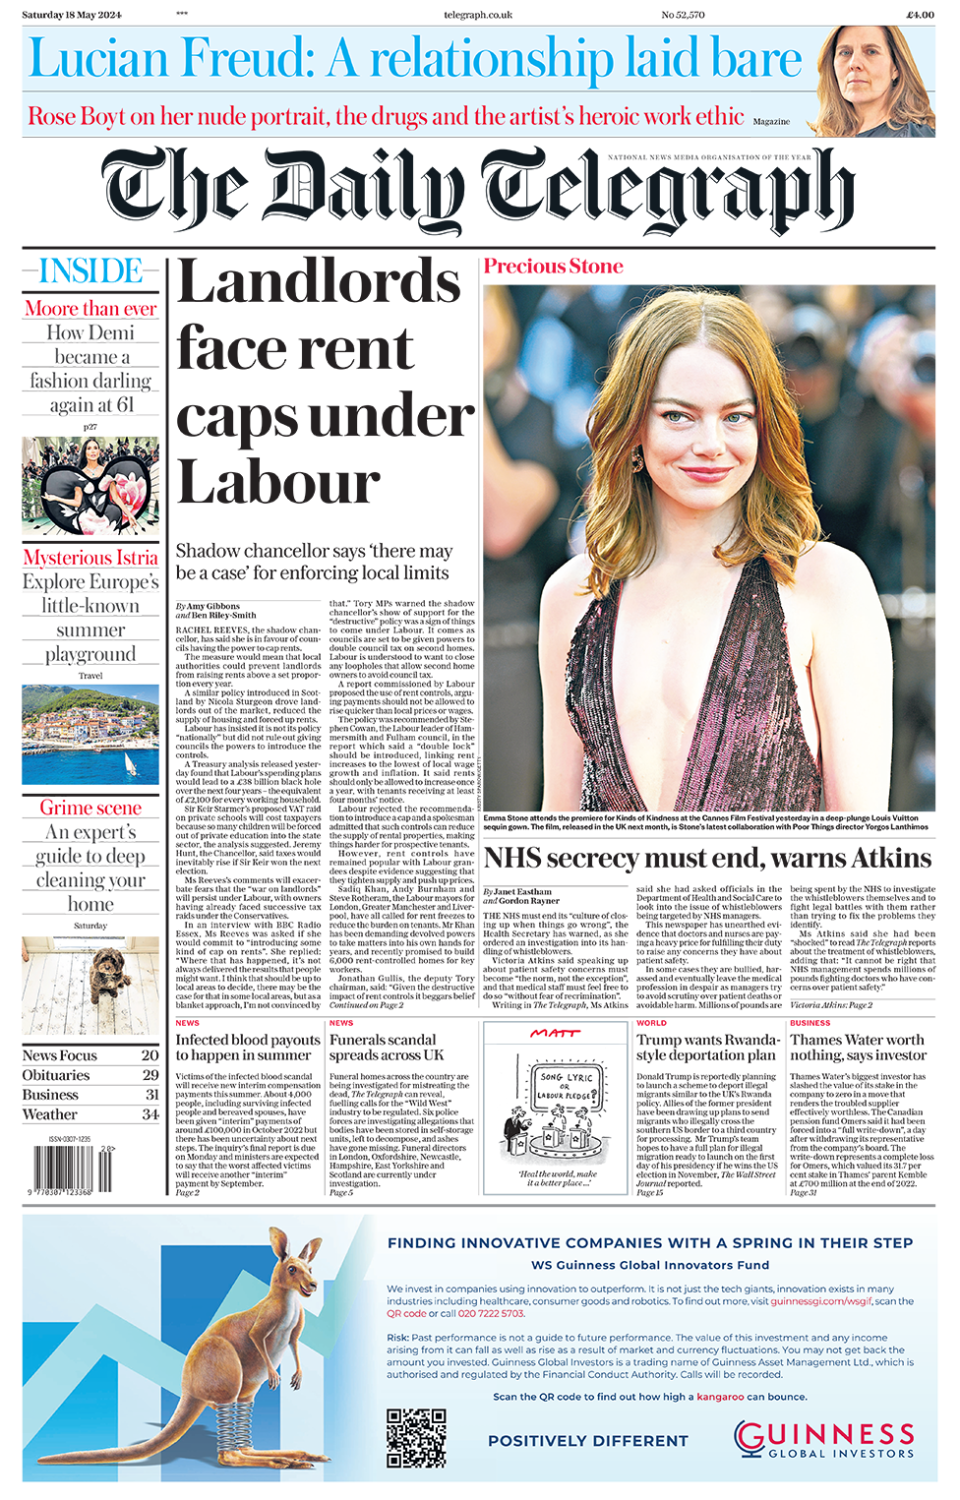 The headline in the Telegraph reads: "Landlords face rent caps under Labour". 